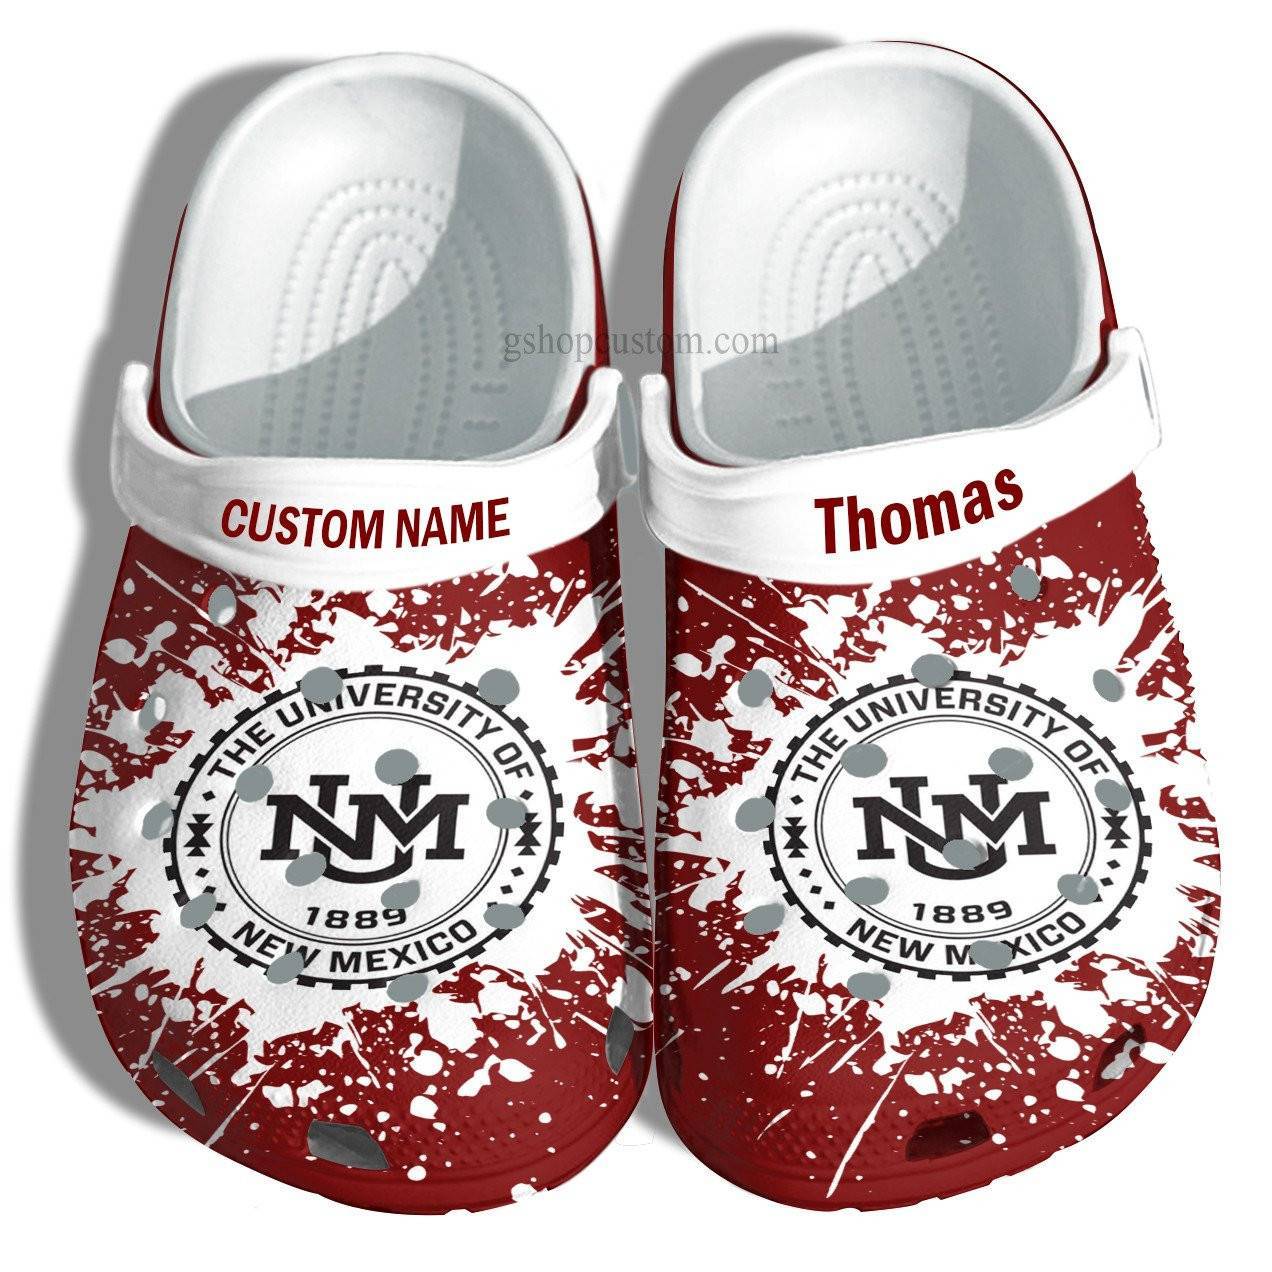 University Of New Mexico University Graduation Gifts Croc Shoes Customize – Admission Gift Crocss Shoes